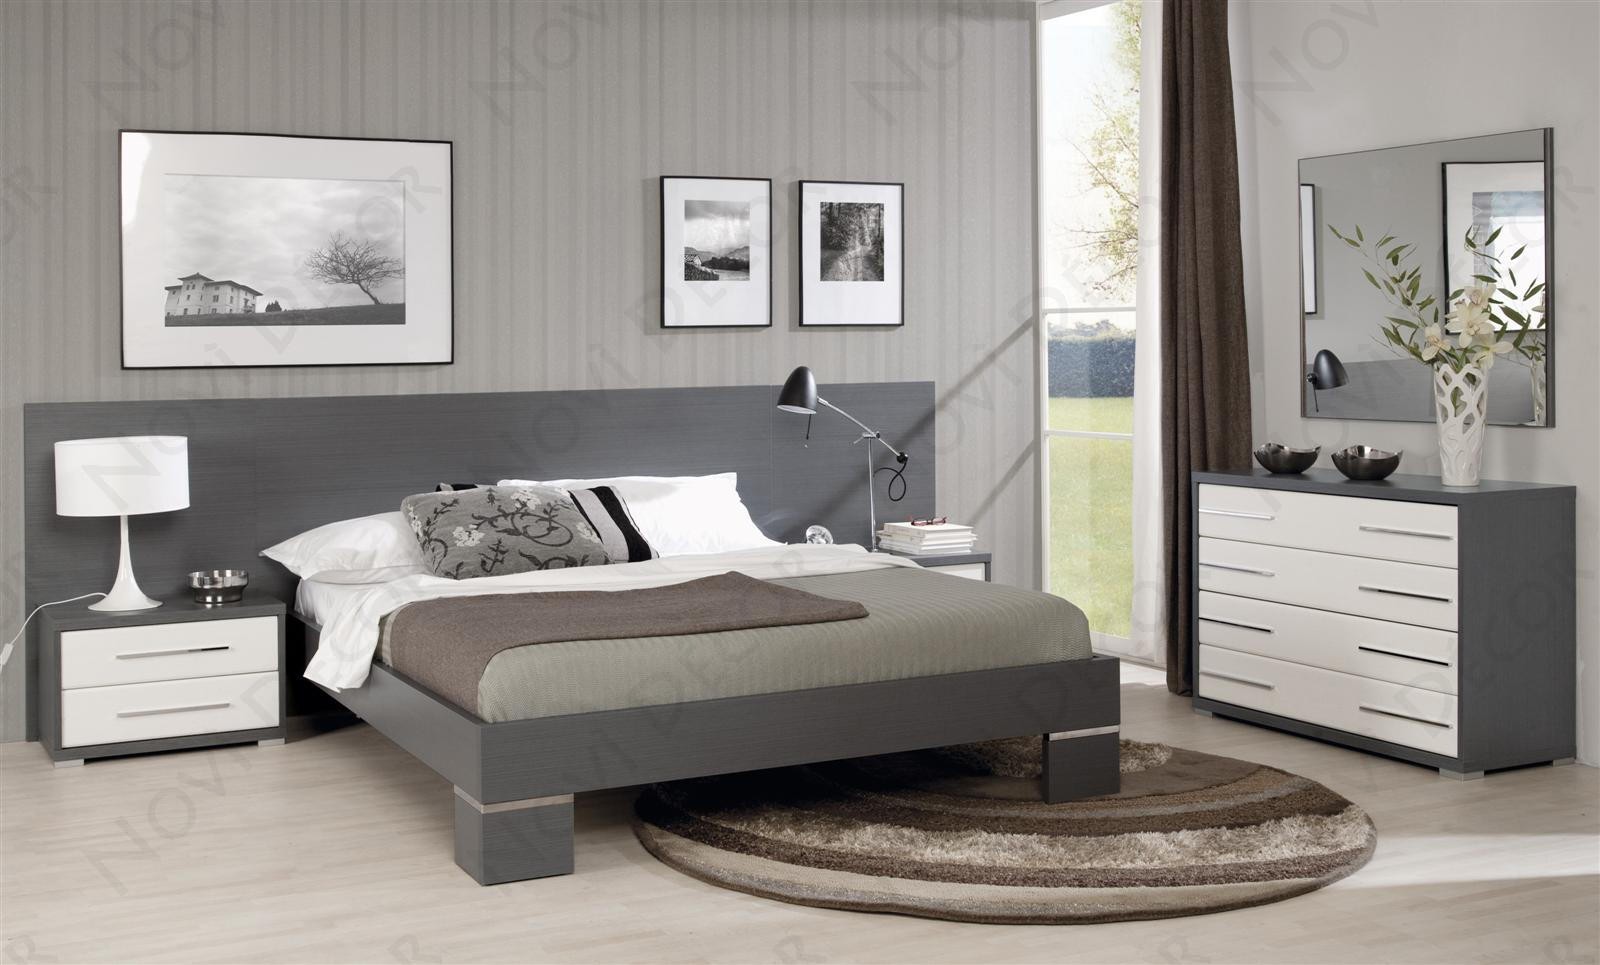 gray room with white furniture photo - 5